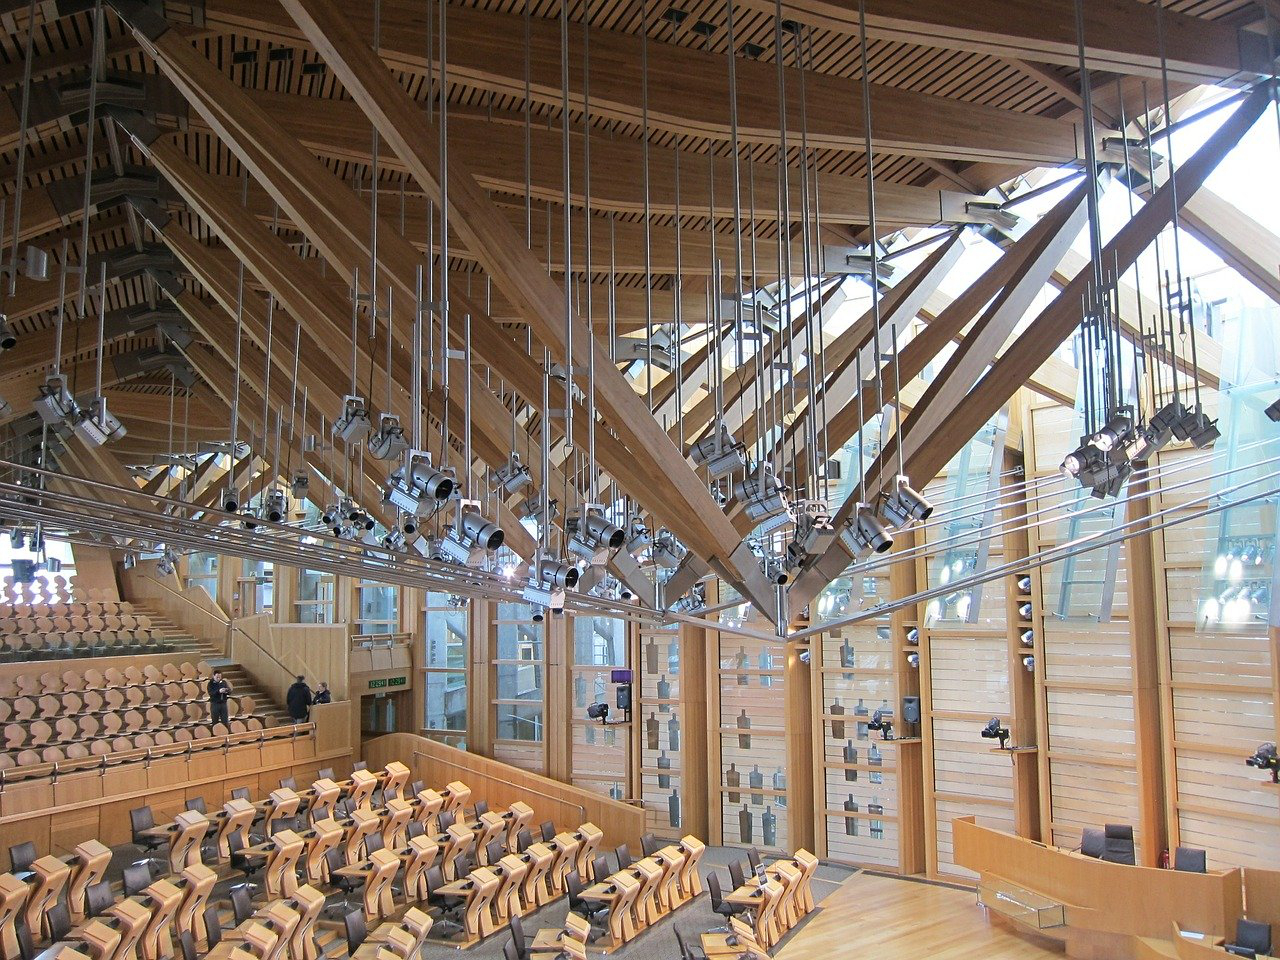 Holyrood launches inquiry into equality and human rights impact of COVID-19